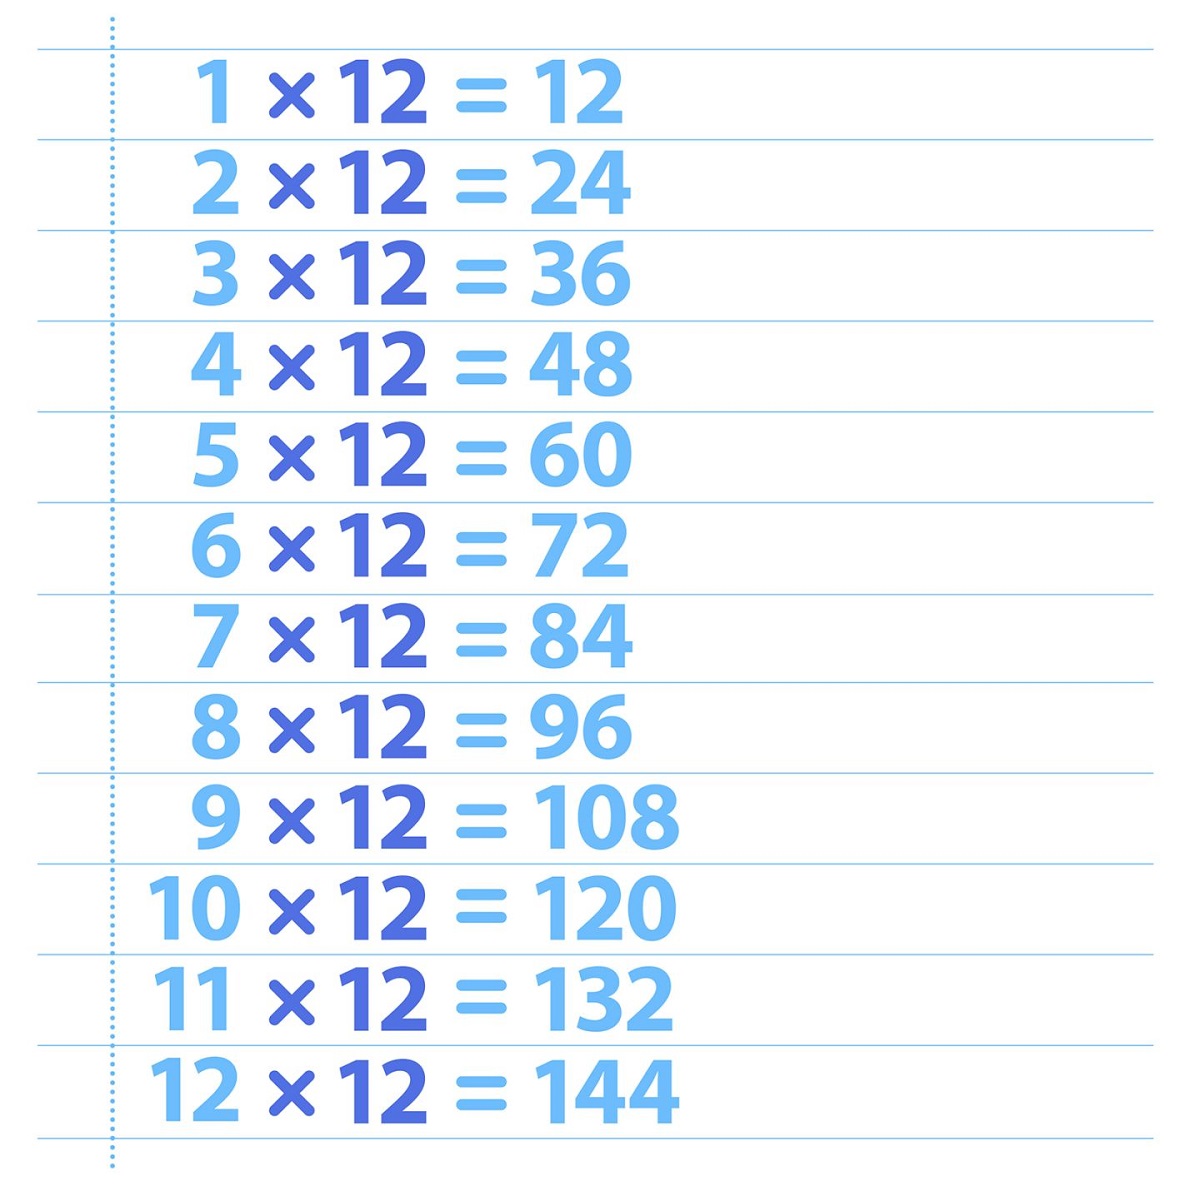 12 times table up to 20